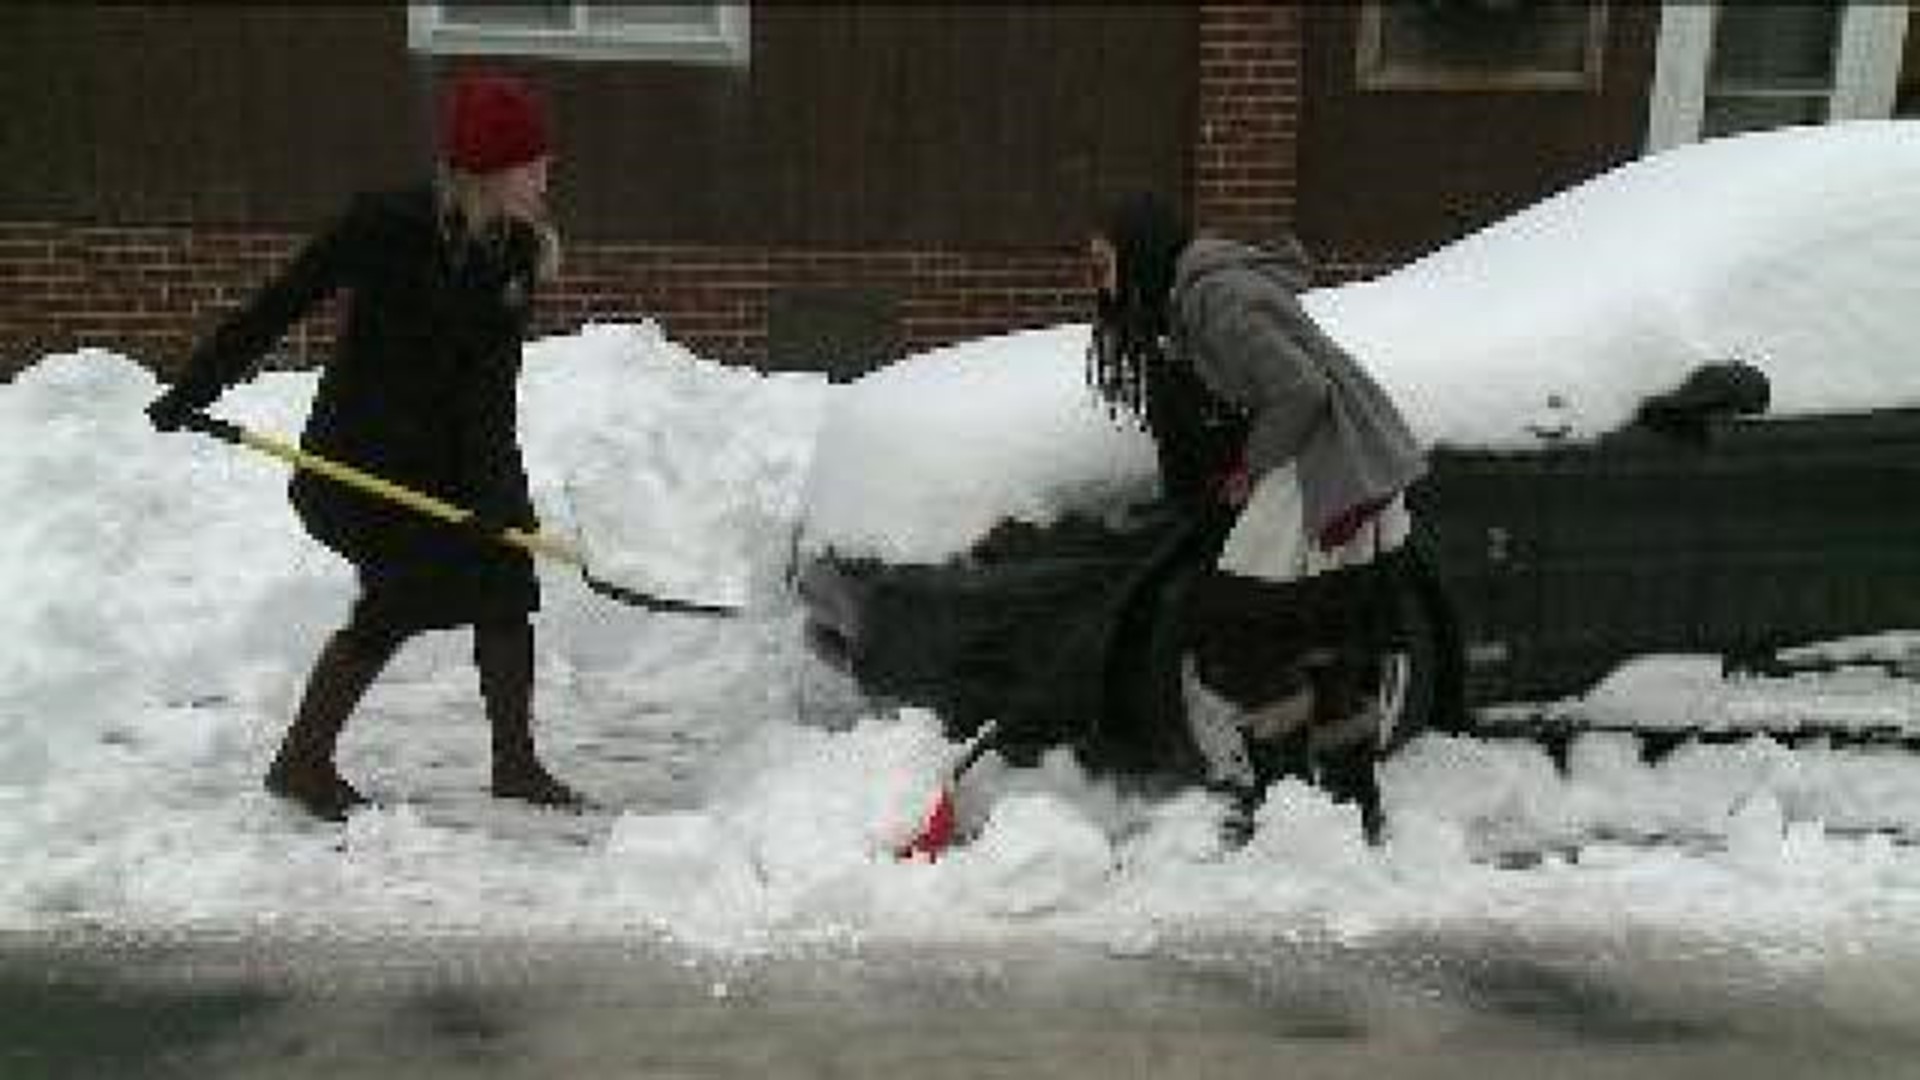 Sisters in Skirts Shovel Out Luzerne County